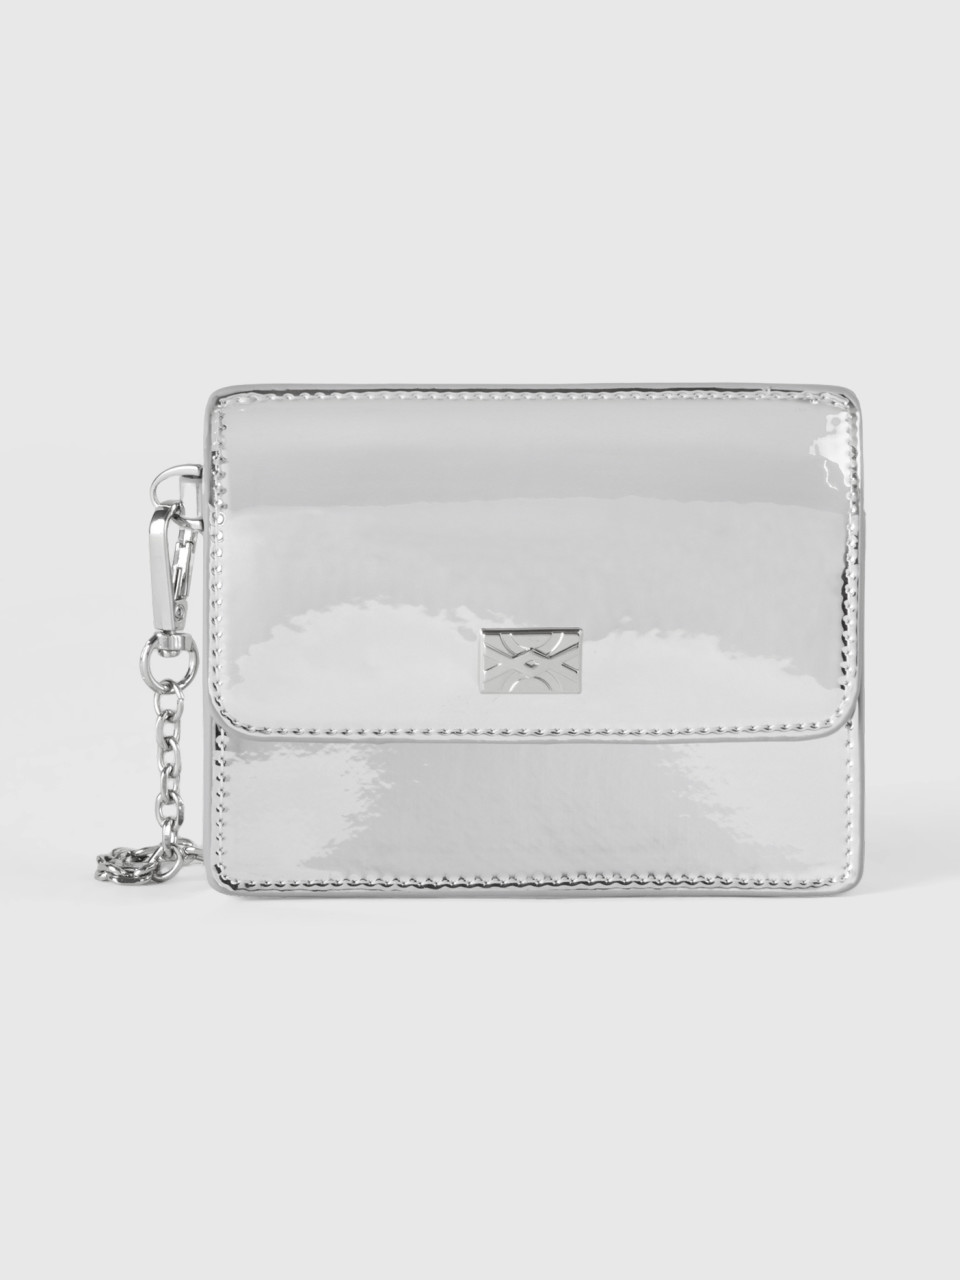 Benetton, Shiny Silver Wallet And Card Holder, Silver, Women